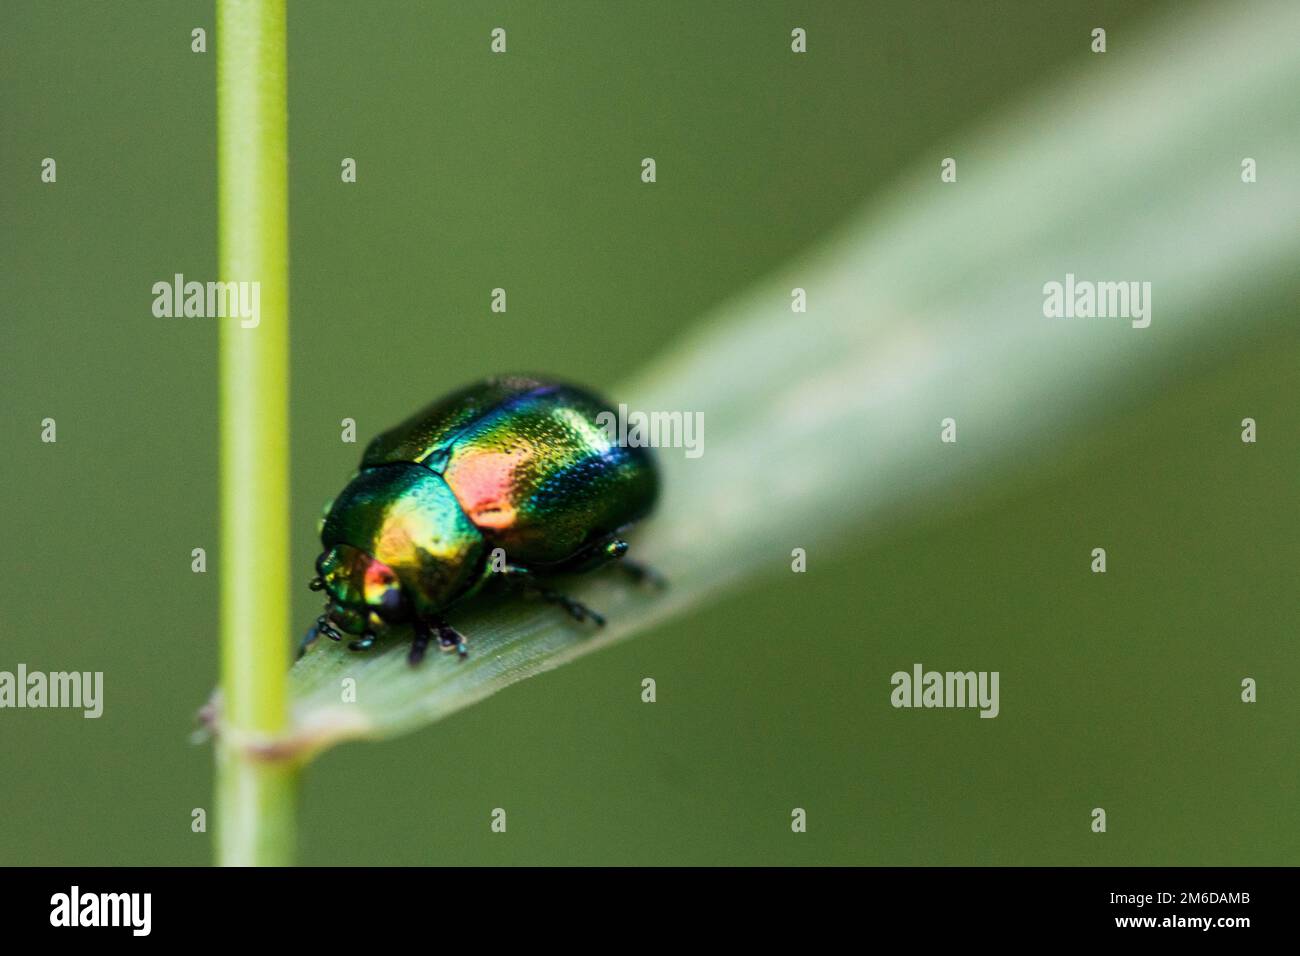 Colorful shiny beetle sitting on grass Stock Photo